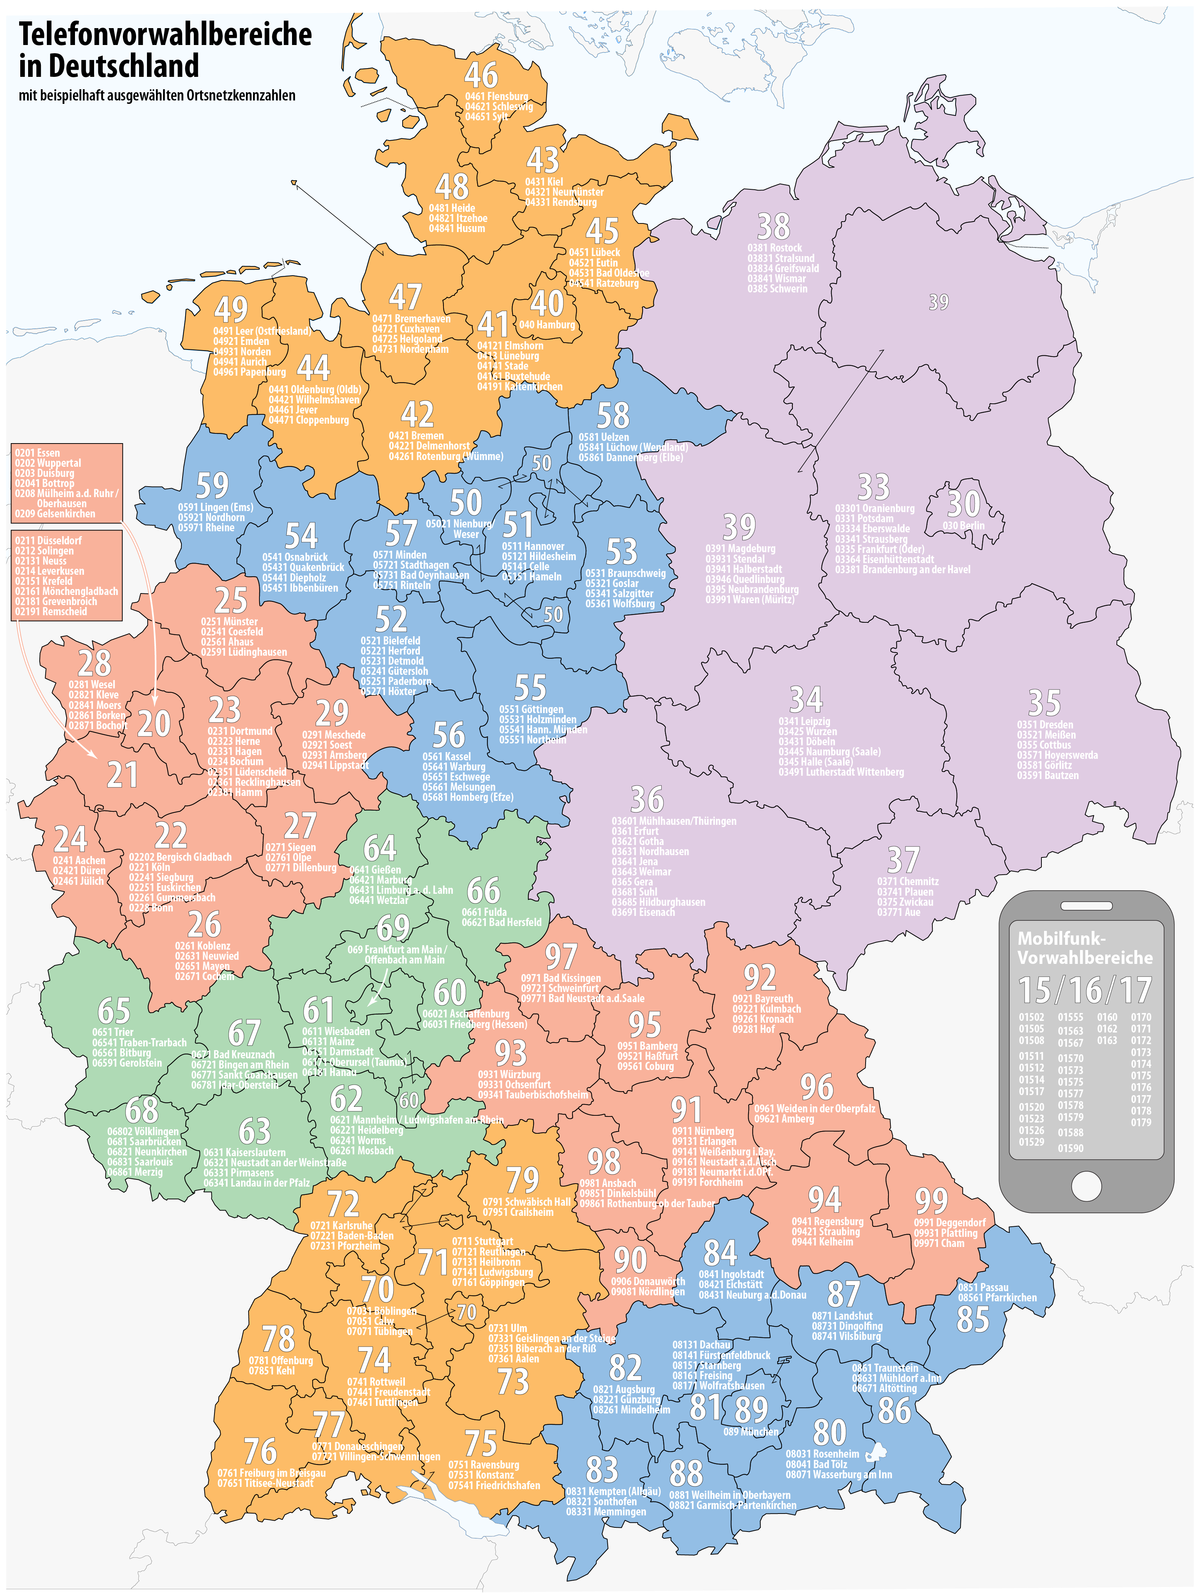 Telephone numbers in Germany.